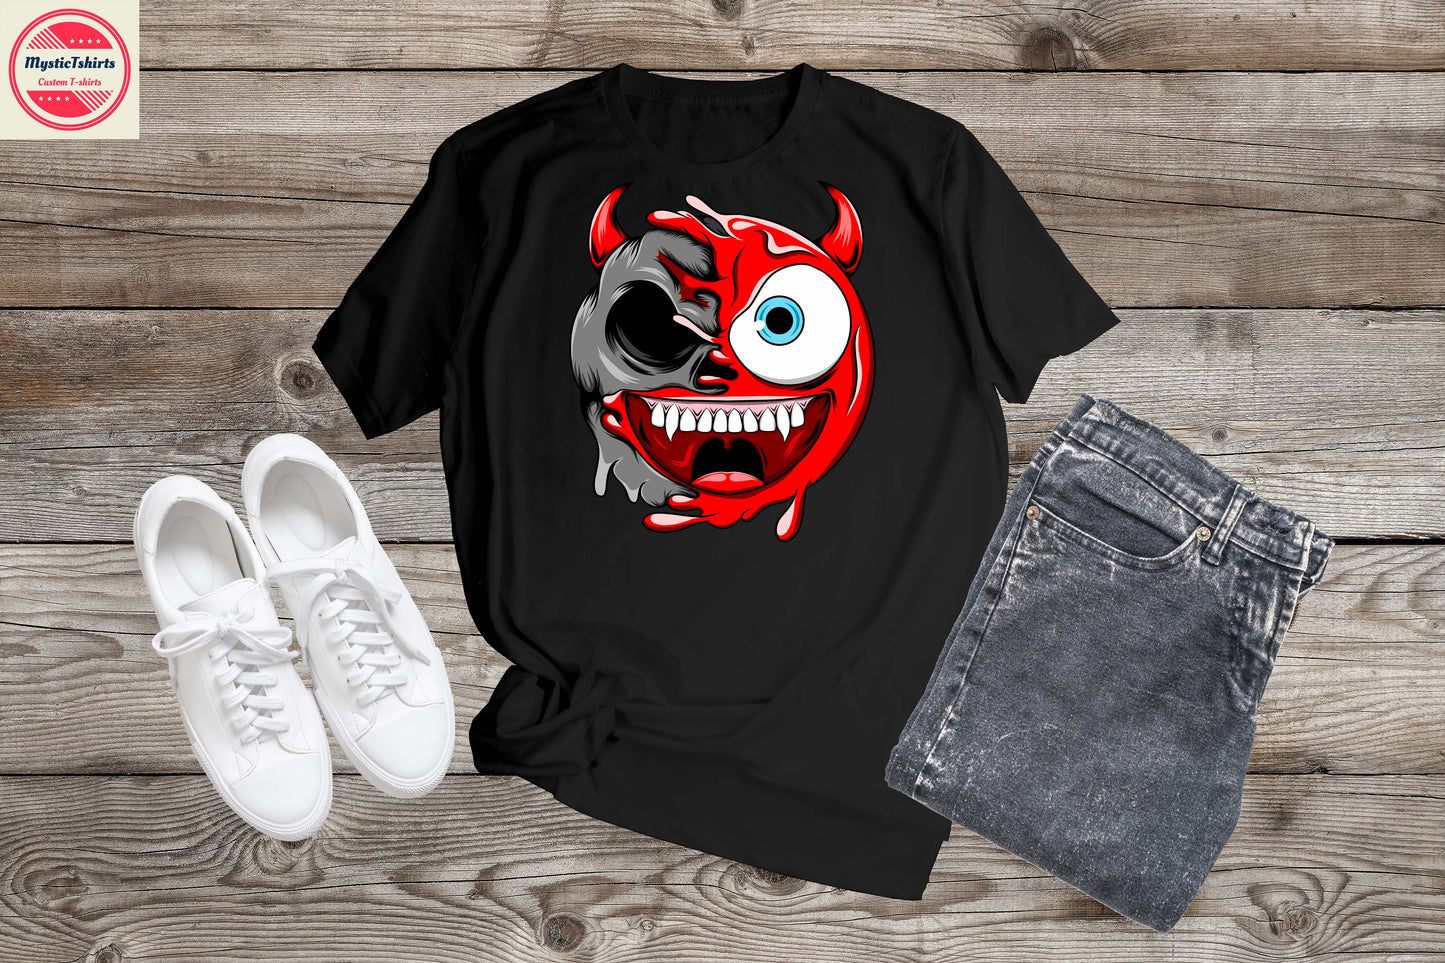 073. CRAZY FACE, Personalized T-Shirt, Custom Text, Make Your Own Shirt, Custom Tee